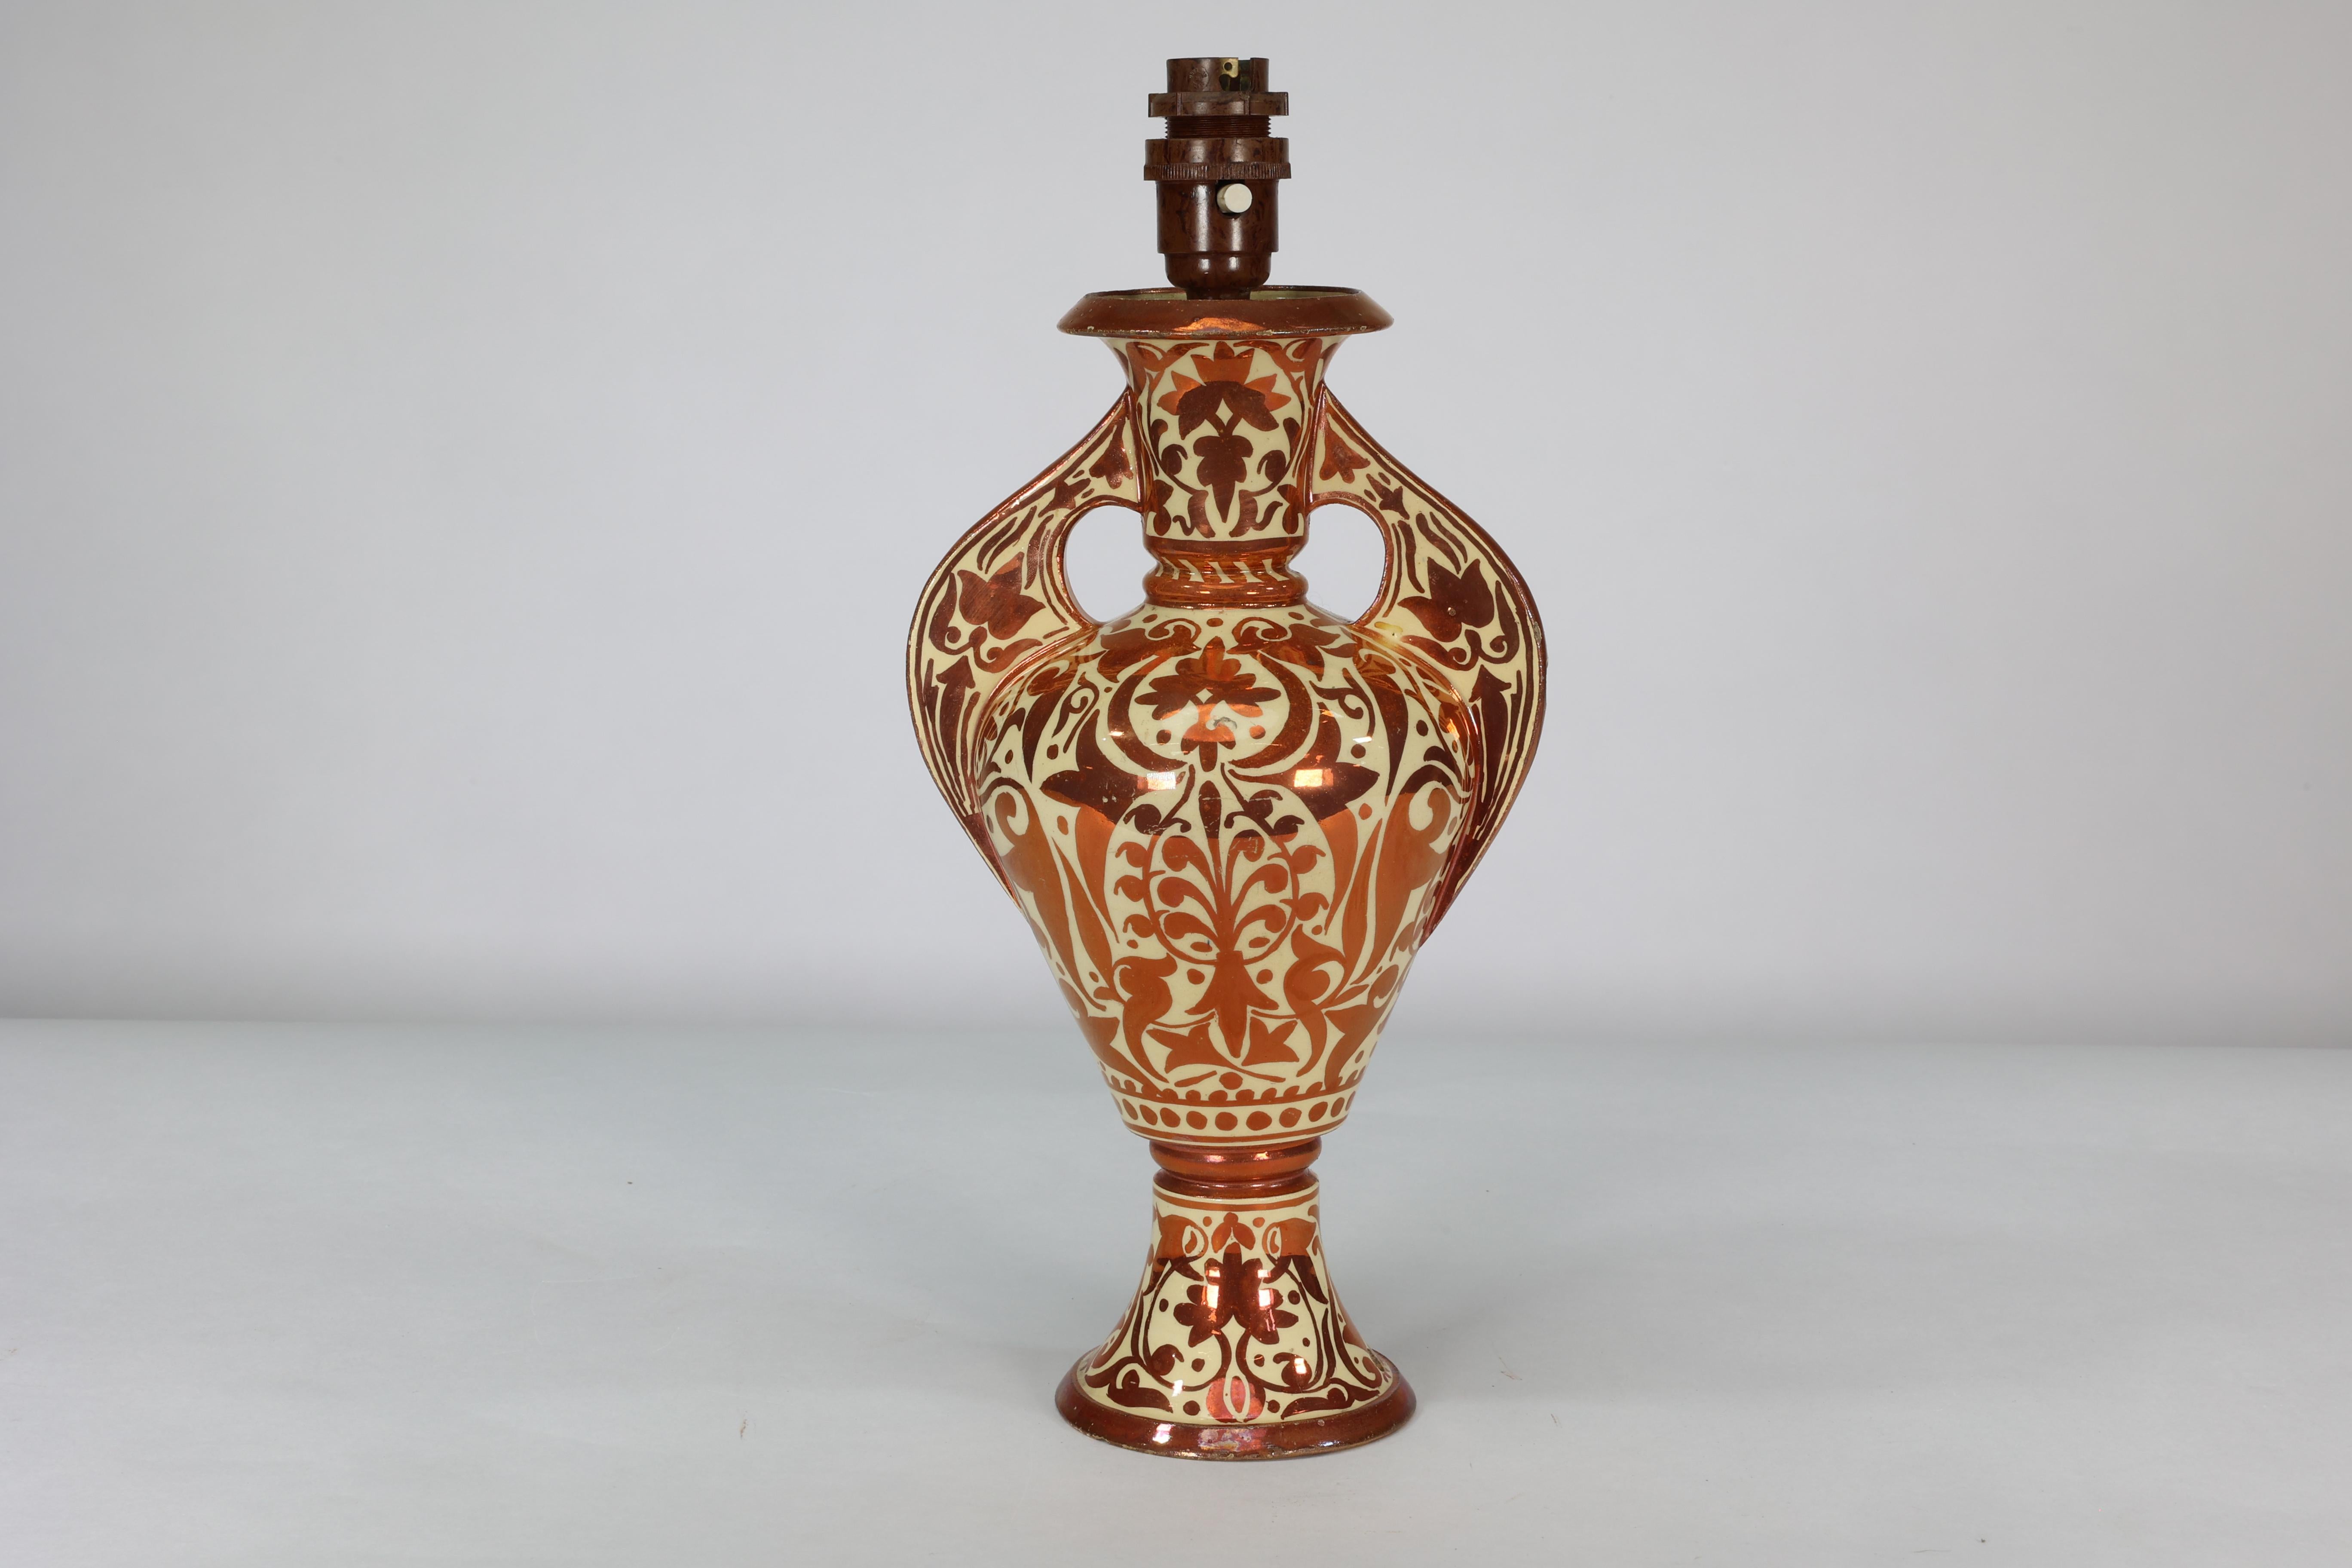 Cantagalli Italian porcelain copper lustre twin-handled vase converted into a table lamp. 